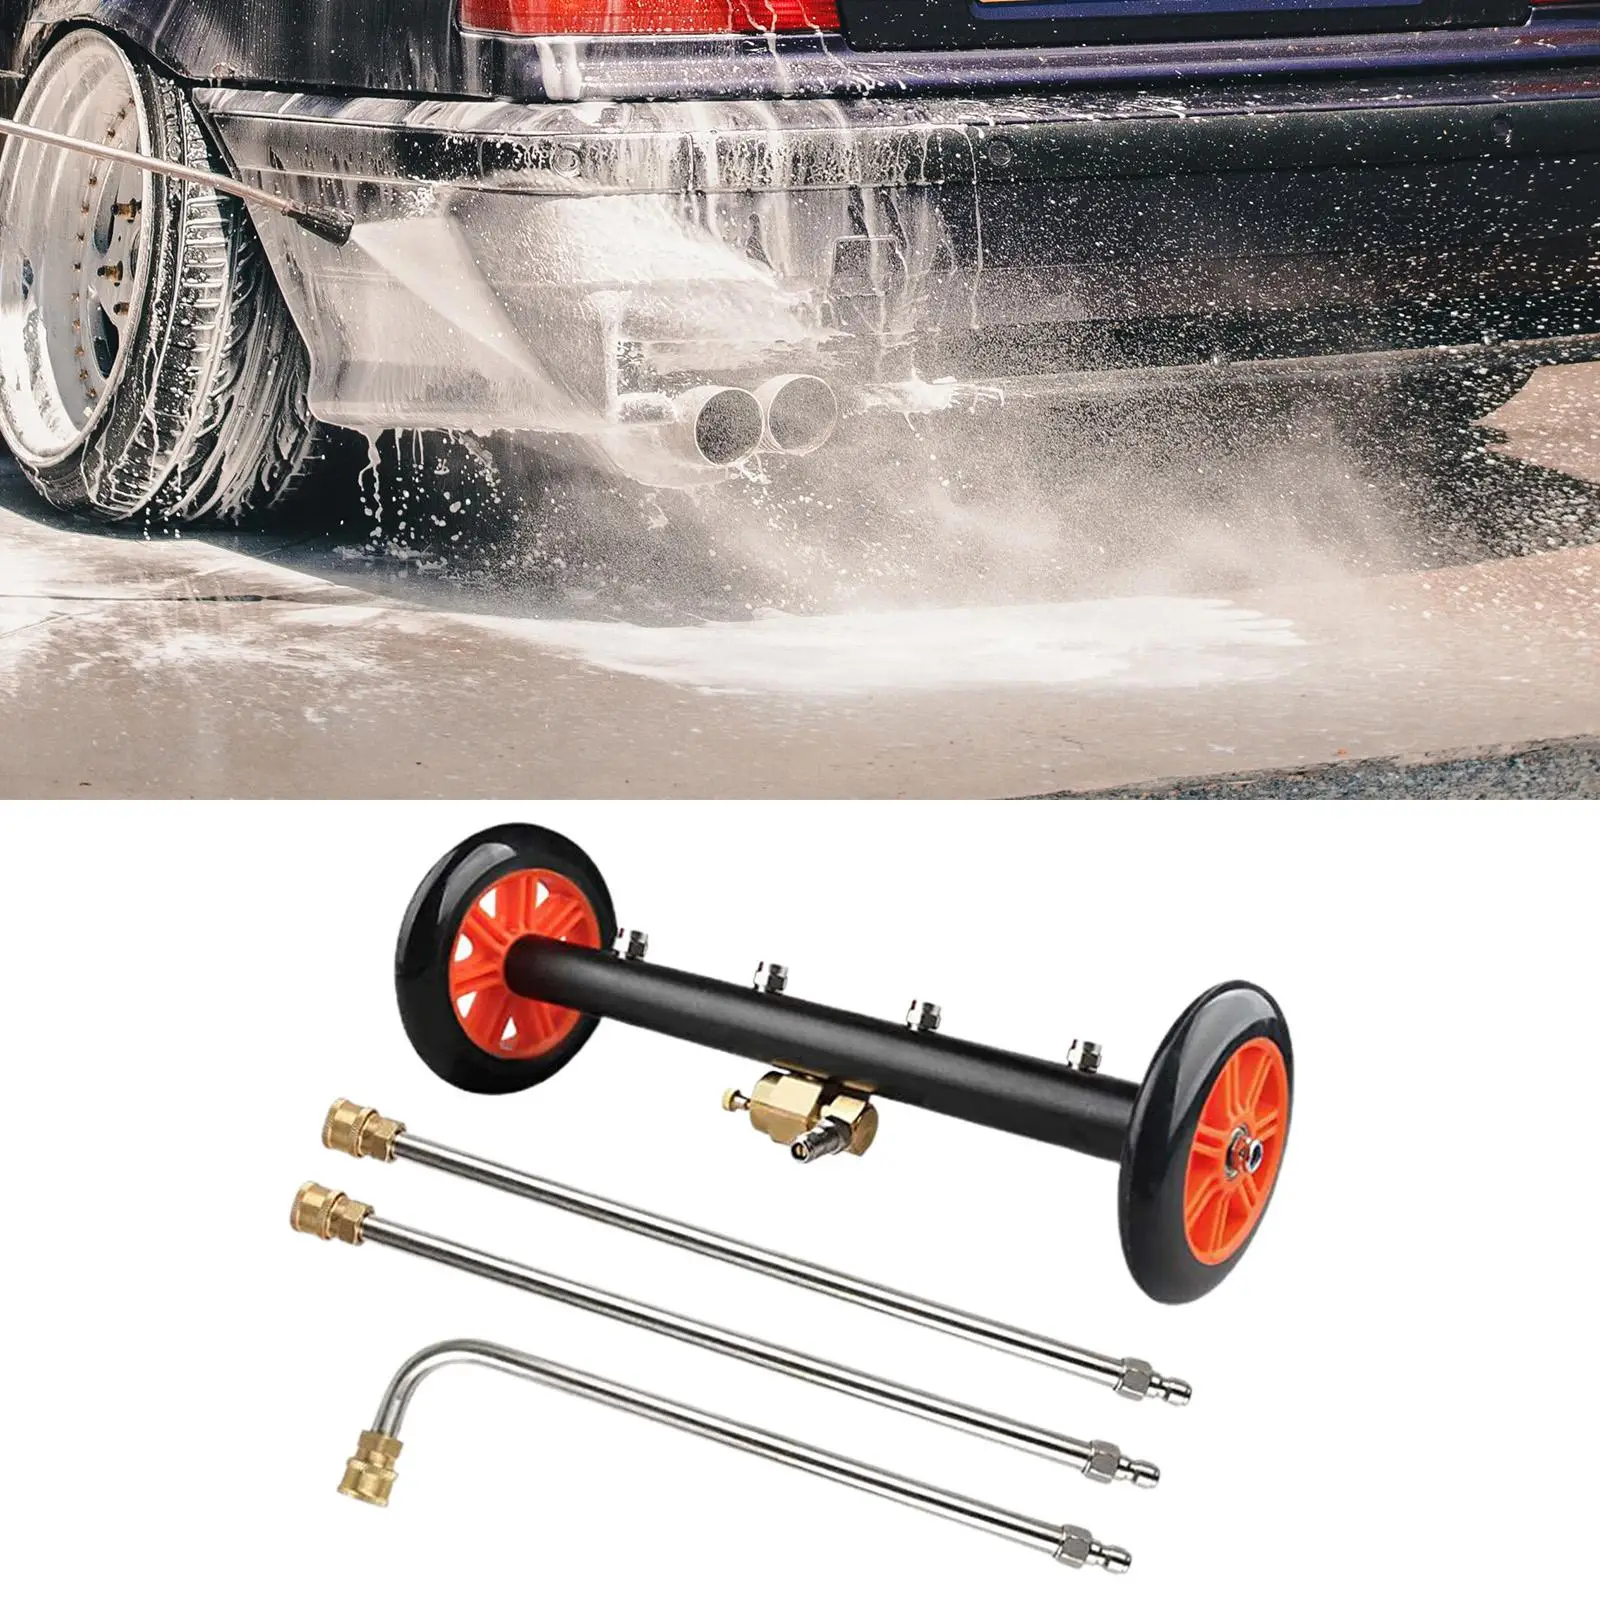 Undercarriage Pressure Washer Attachment Adjustable for Driveways